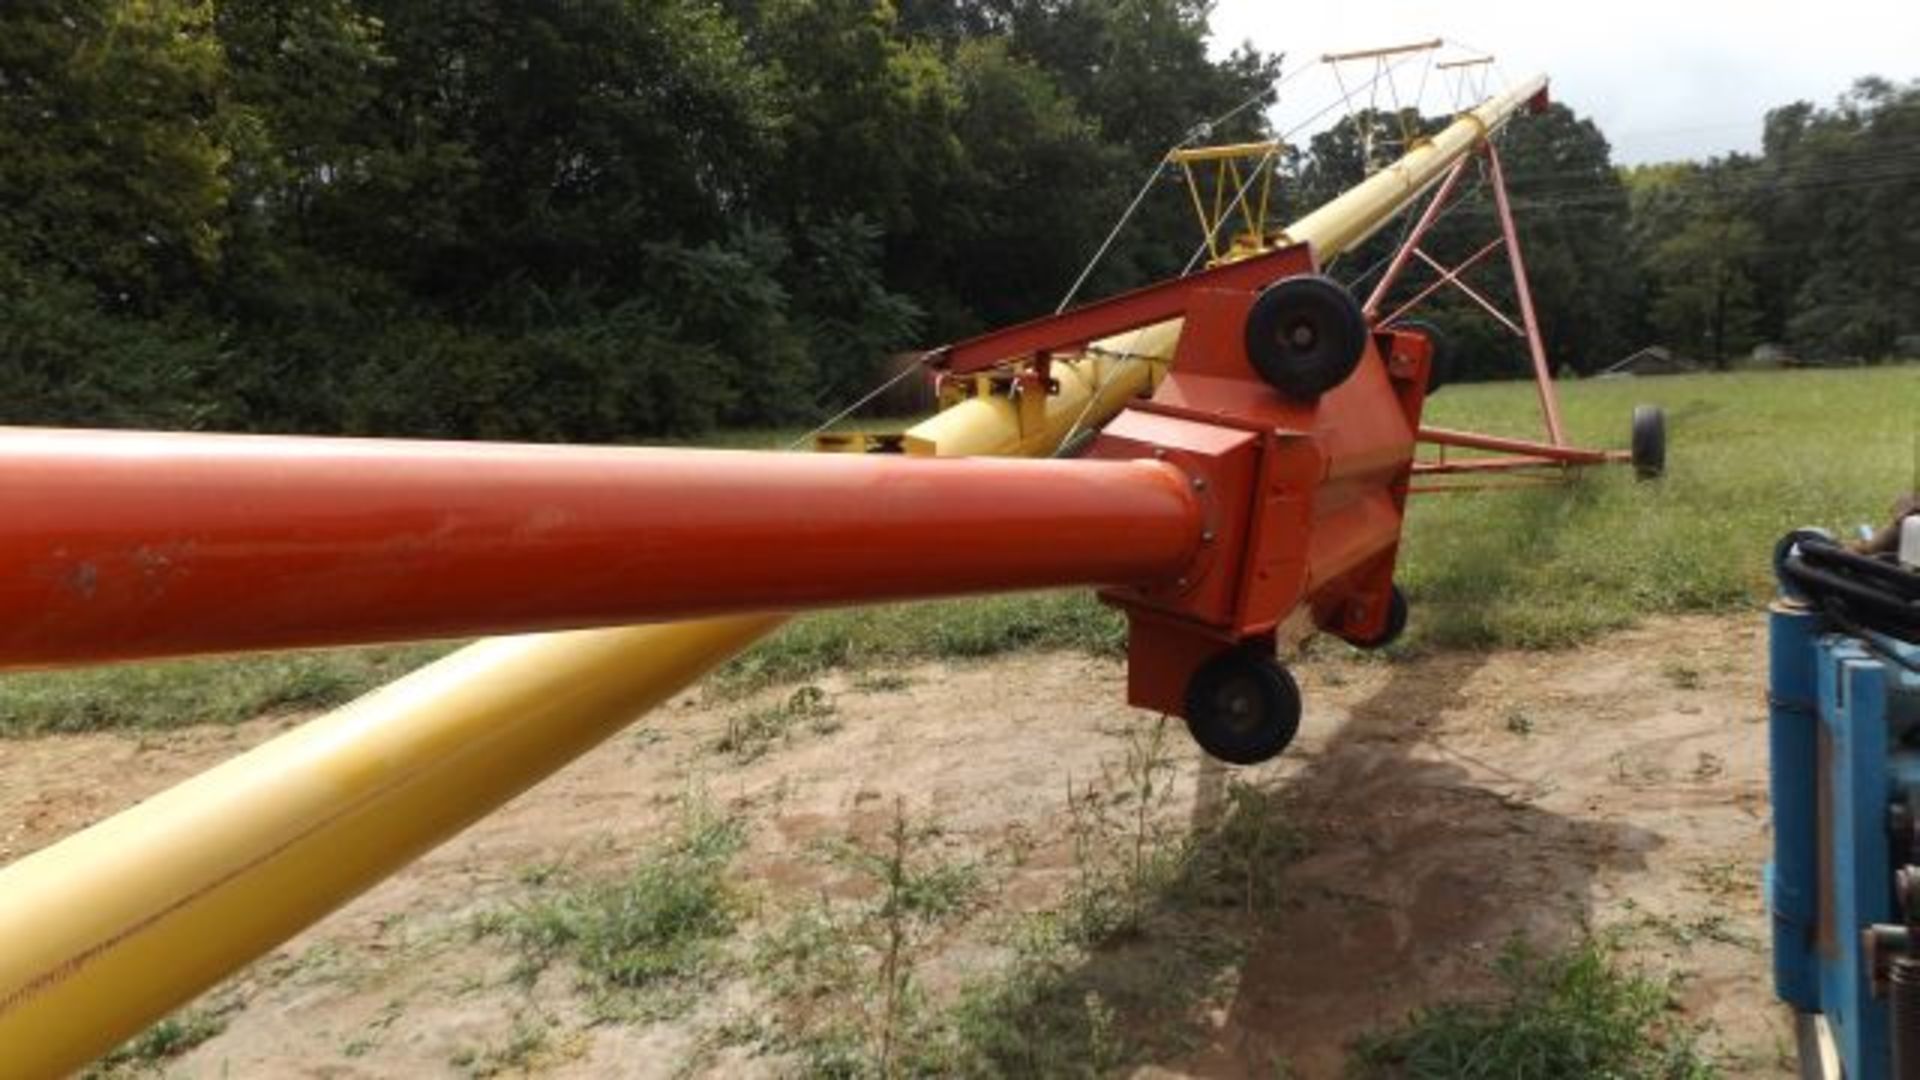 Lot 620 Westfield MK 100-71 Auger w/Swing Around Drive Over Hopper - Image 3 of 3